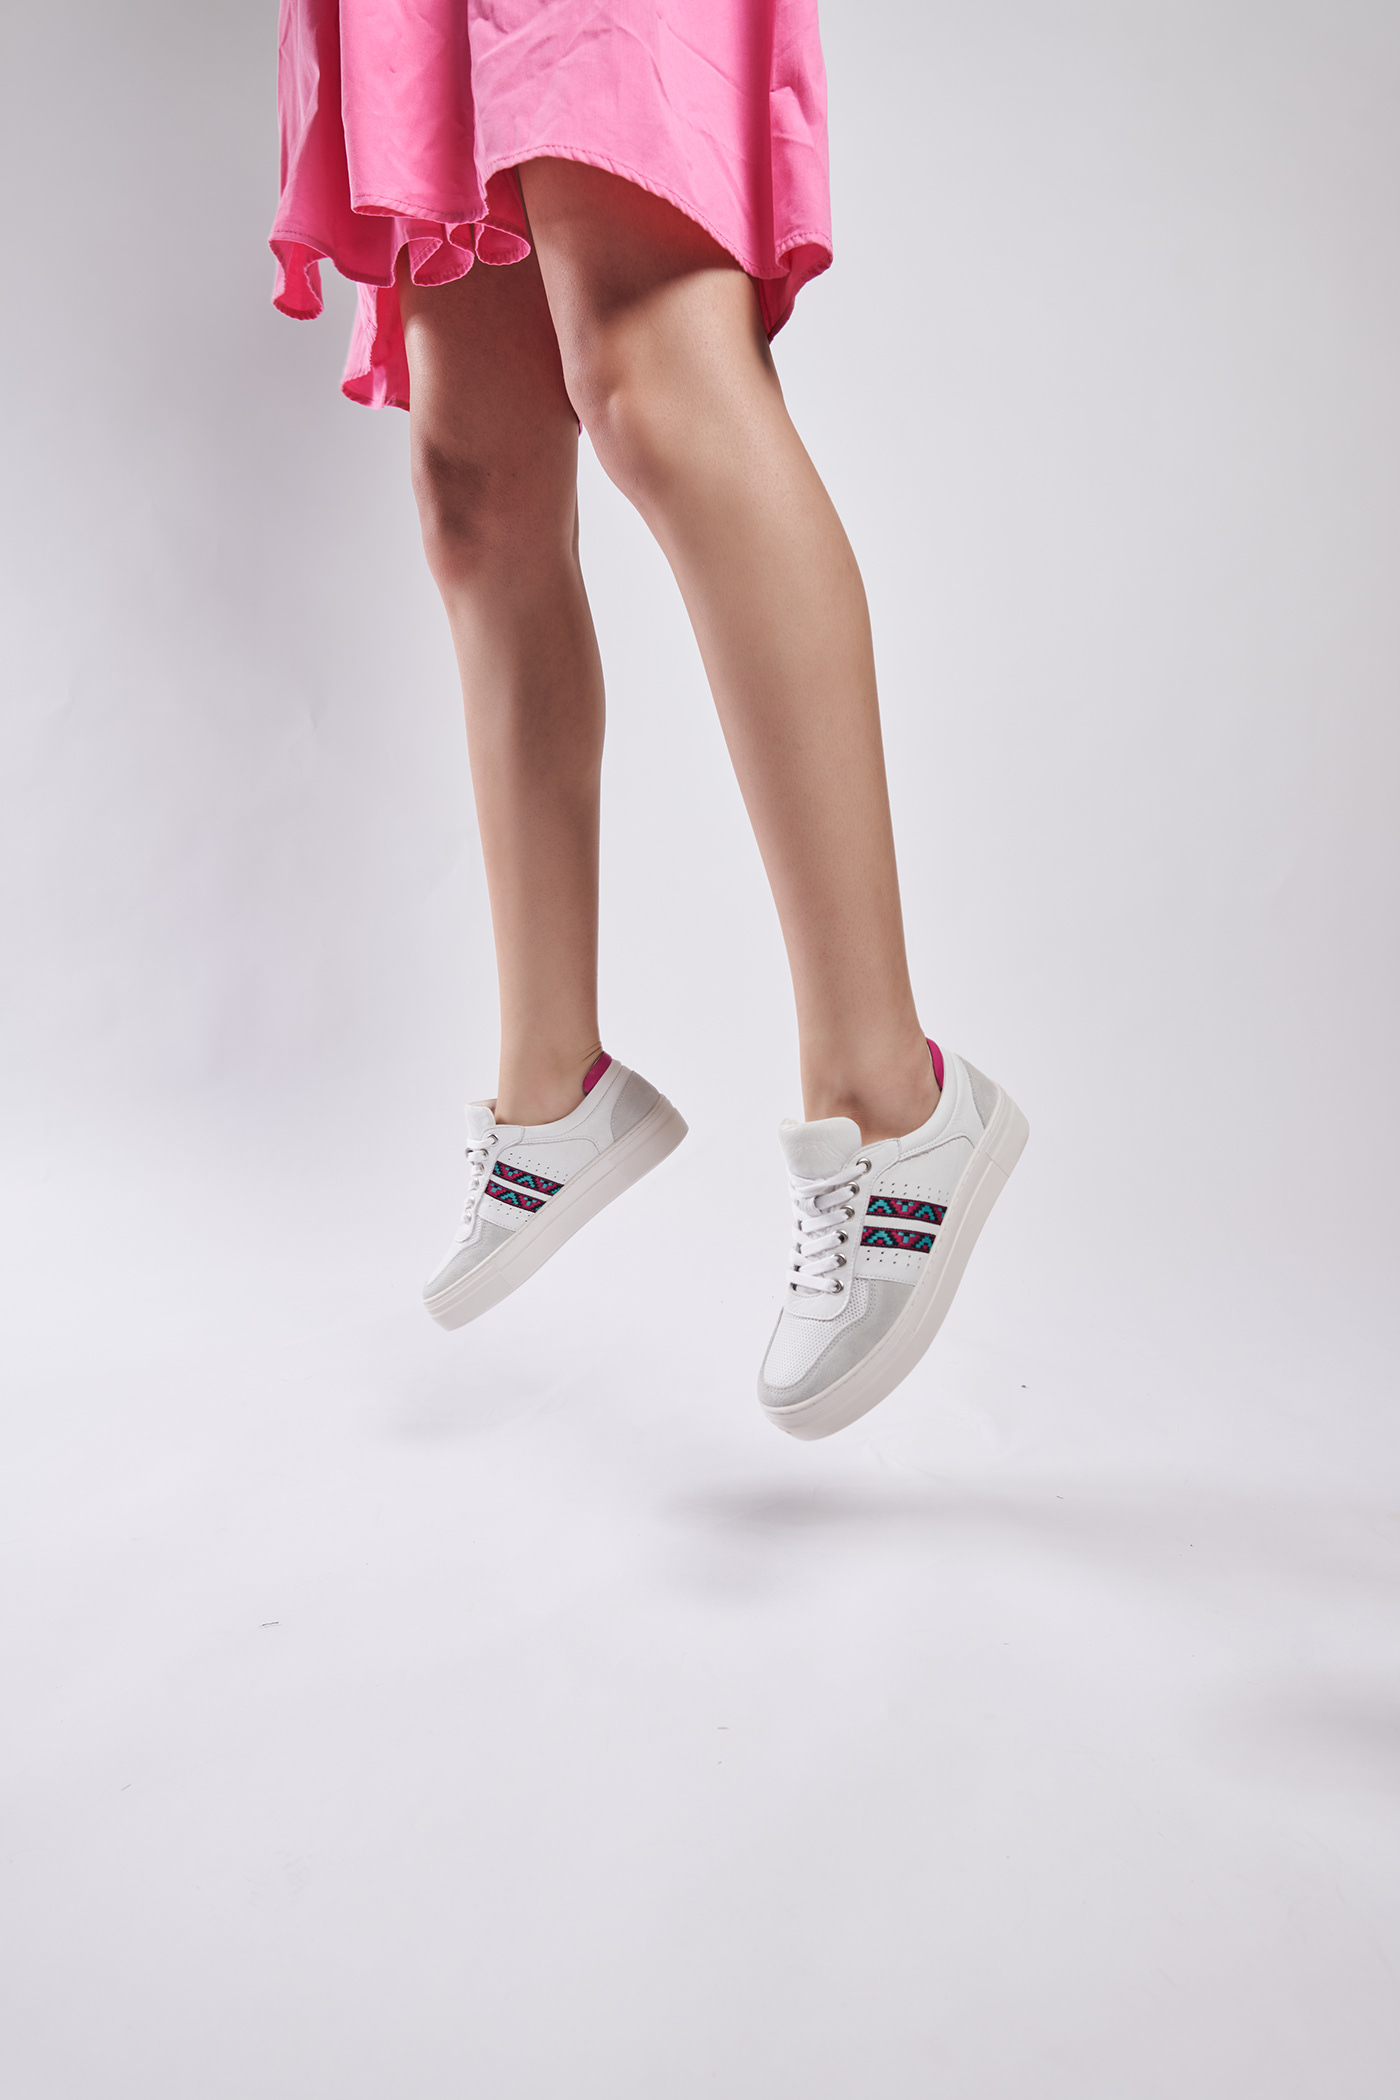 shoes Fashion  Photography  photoshoot photographer model woman editorial